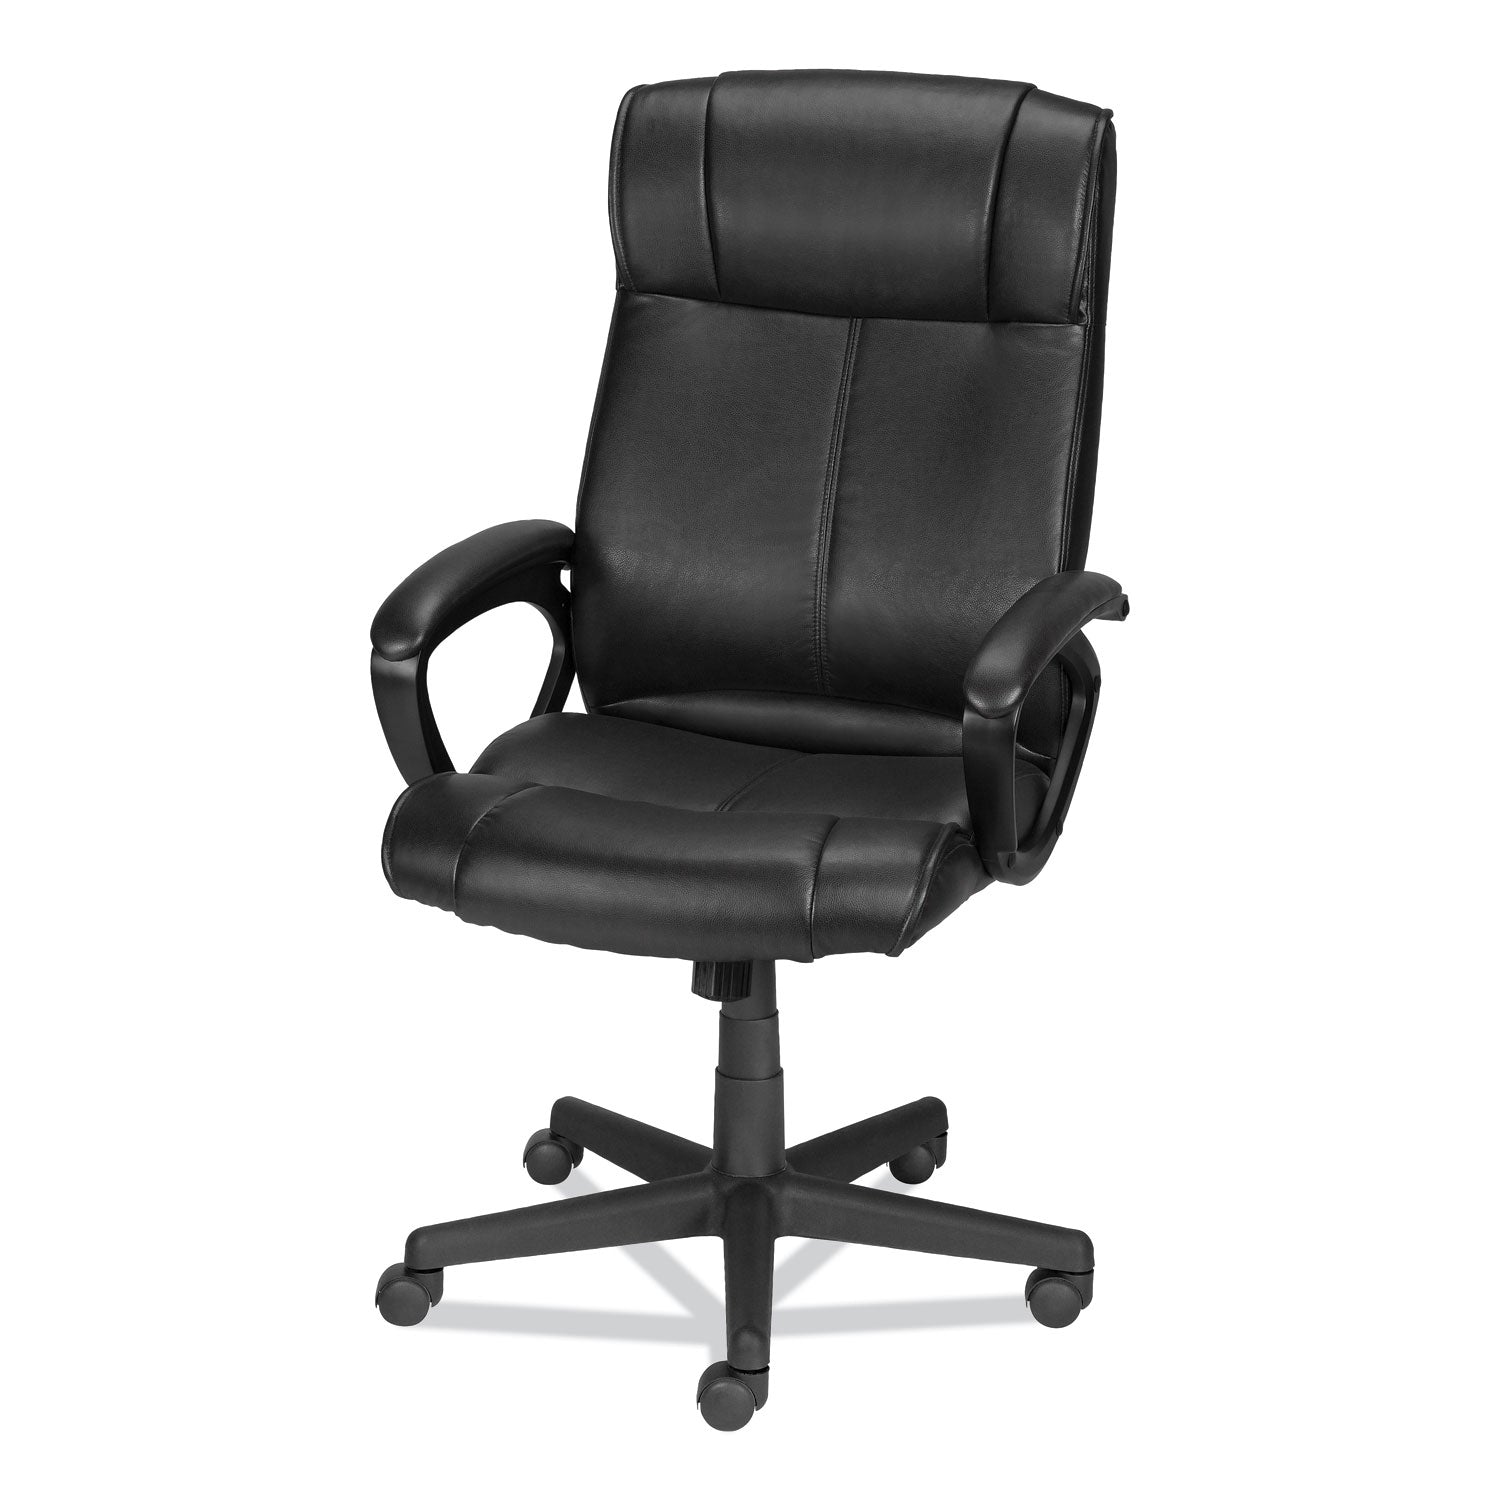 Alera Dalibor Series Manager Chair, Supports Up to 250 lb, 17.5" to 21.3" Seat Height, Black Seat/Back, Black Base - 5